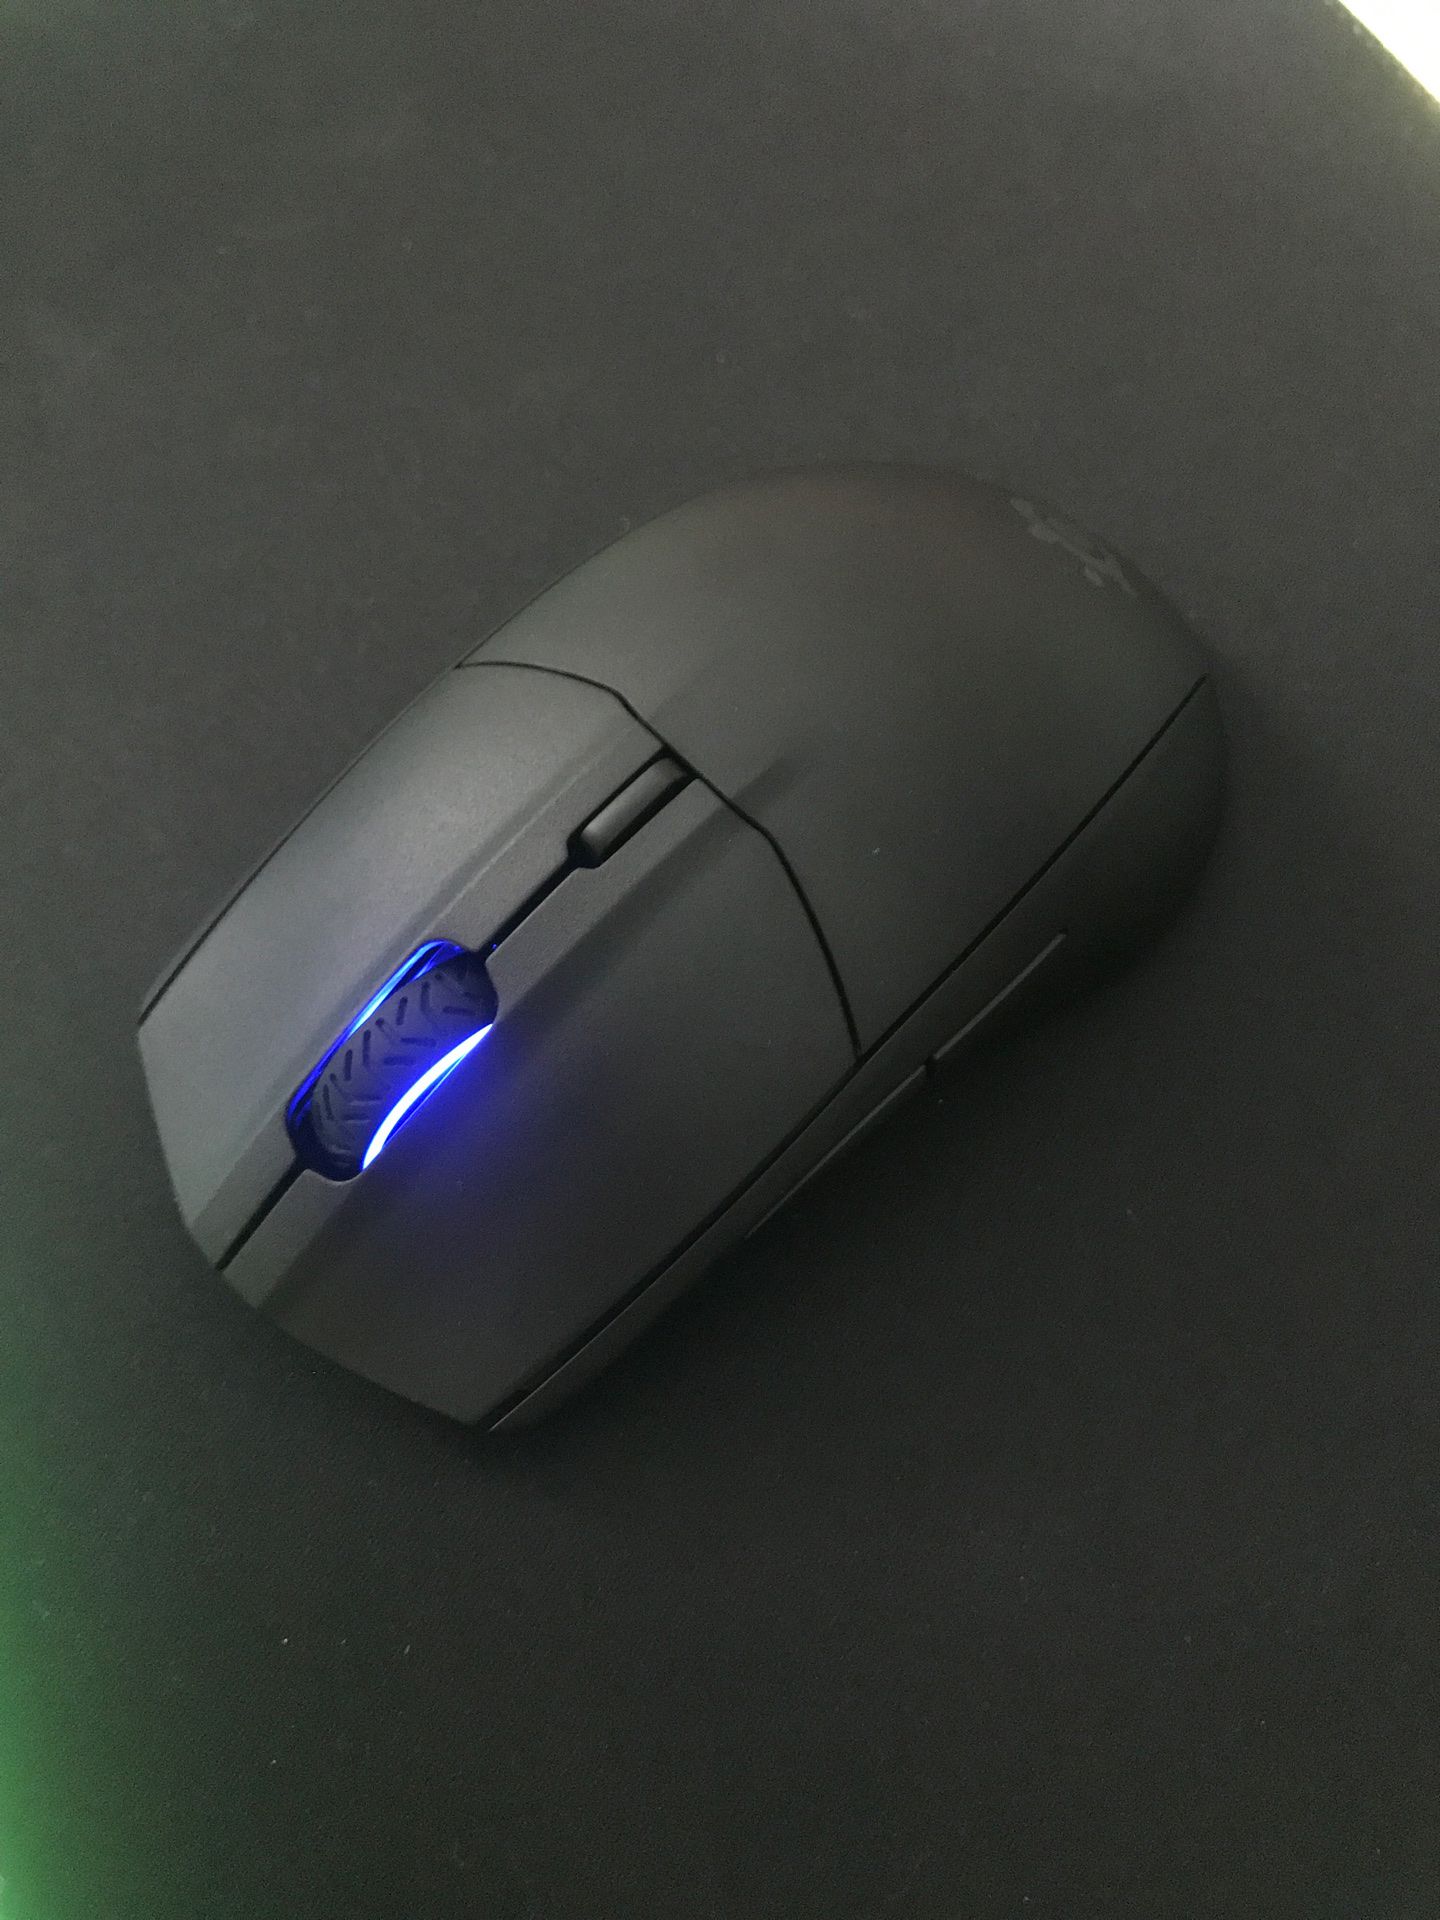 STEELSERIES RIVAL 3 WIRELESS GAMING MOUSE